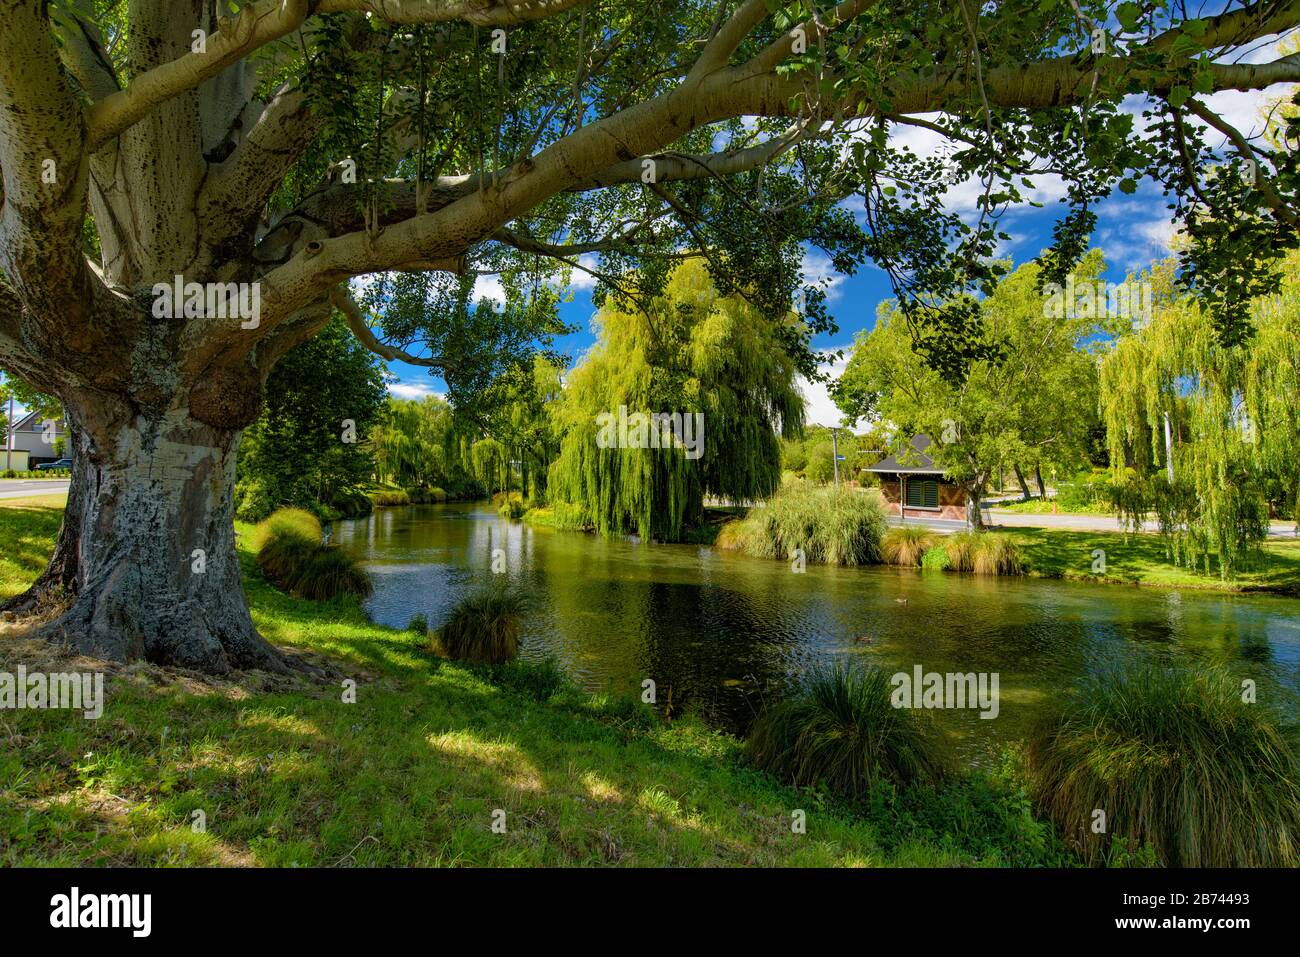 Willow trees by Avon River in Christchurch, New Zealand Stock Photo